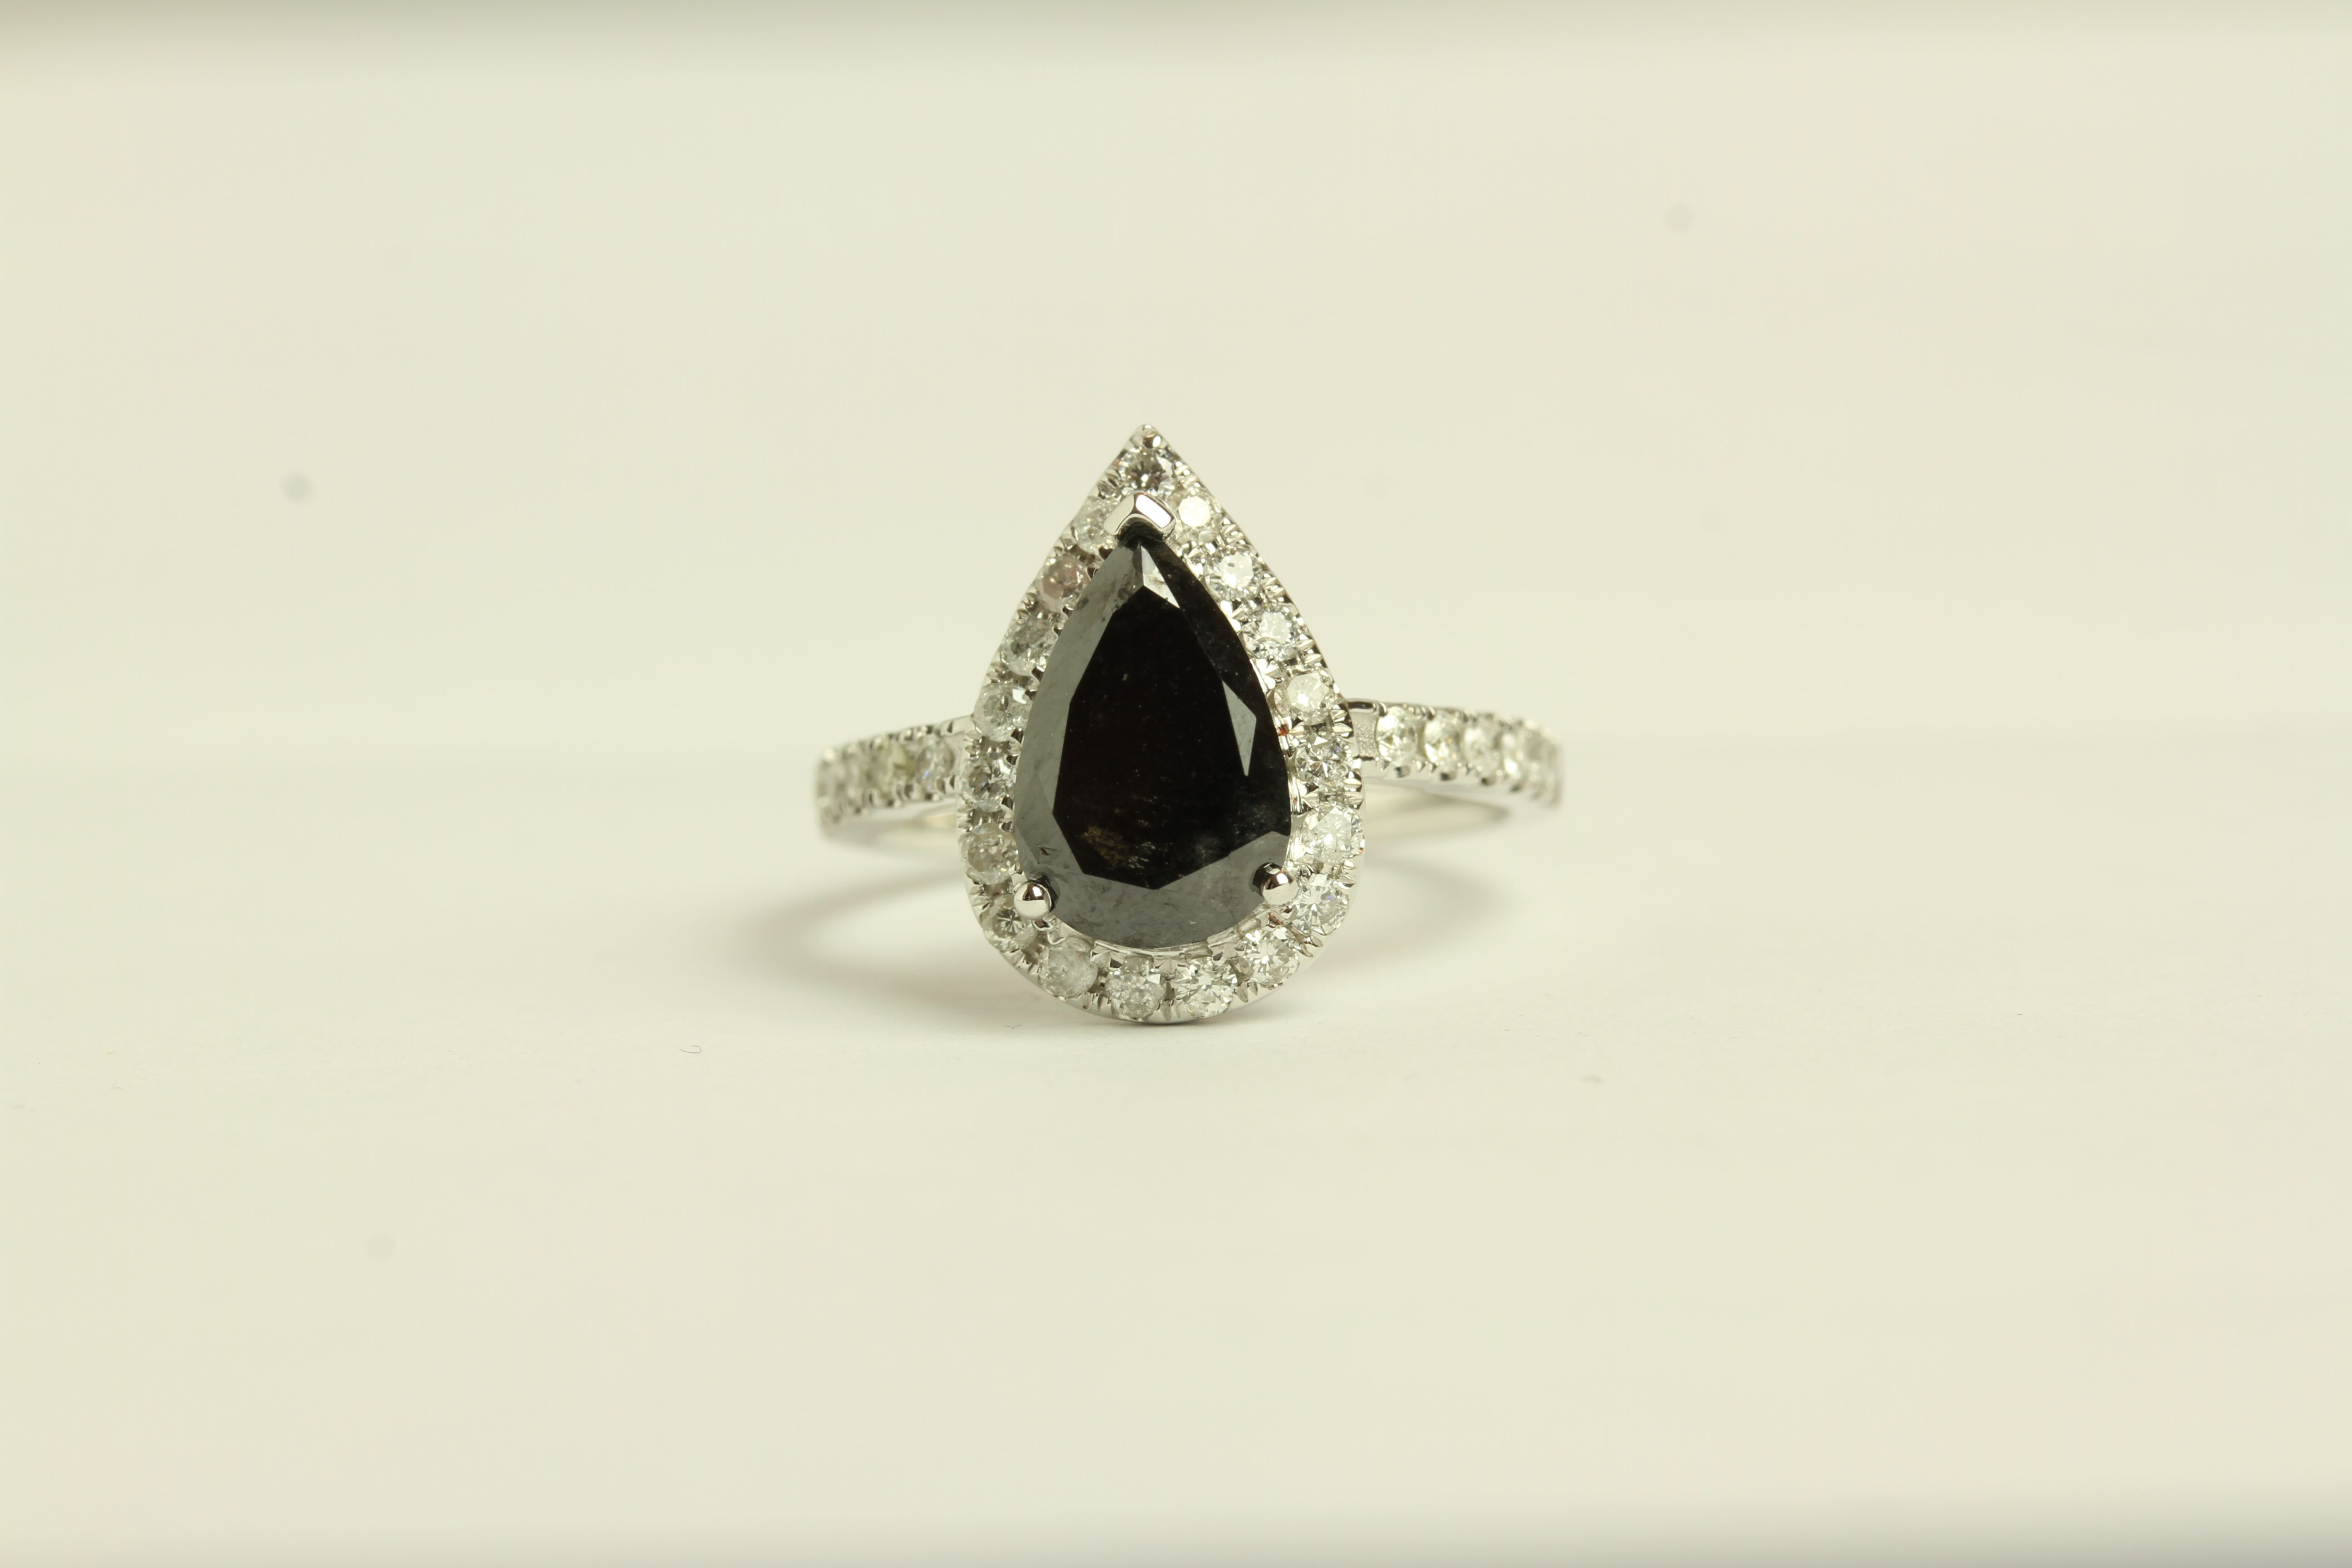 Black and White Diamond ring, set with 1 pear cut black diamond approximately 2.38ct, - Image 2 of 5